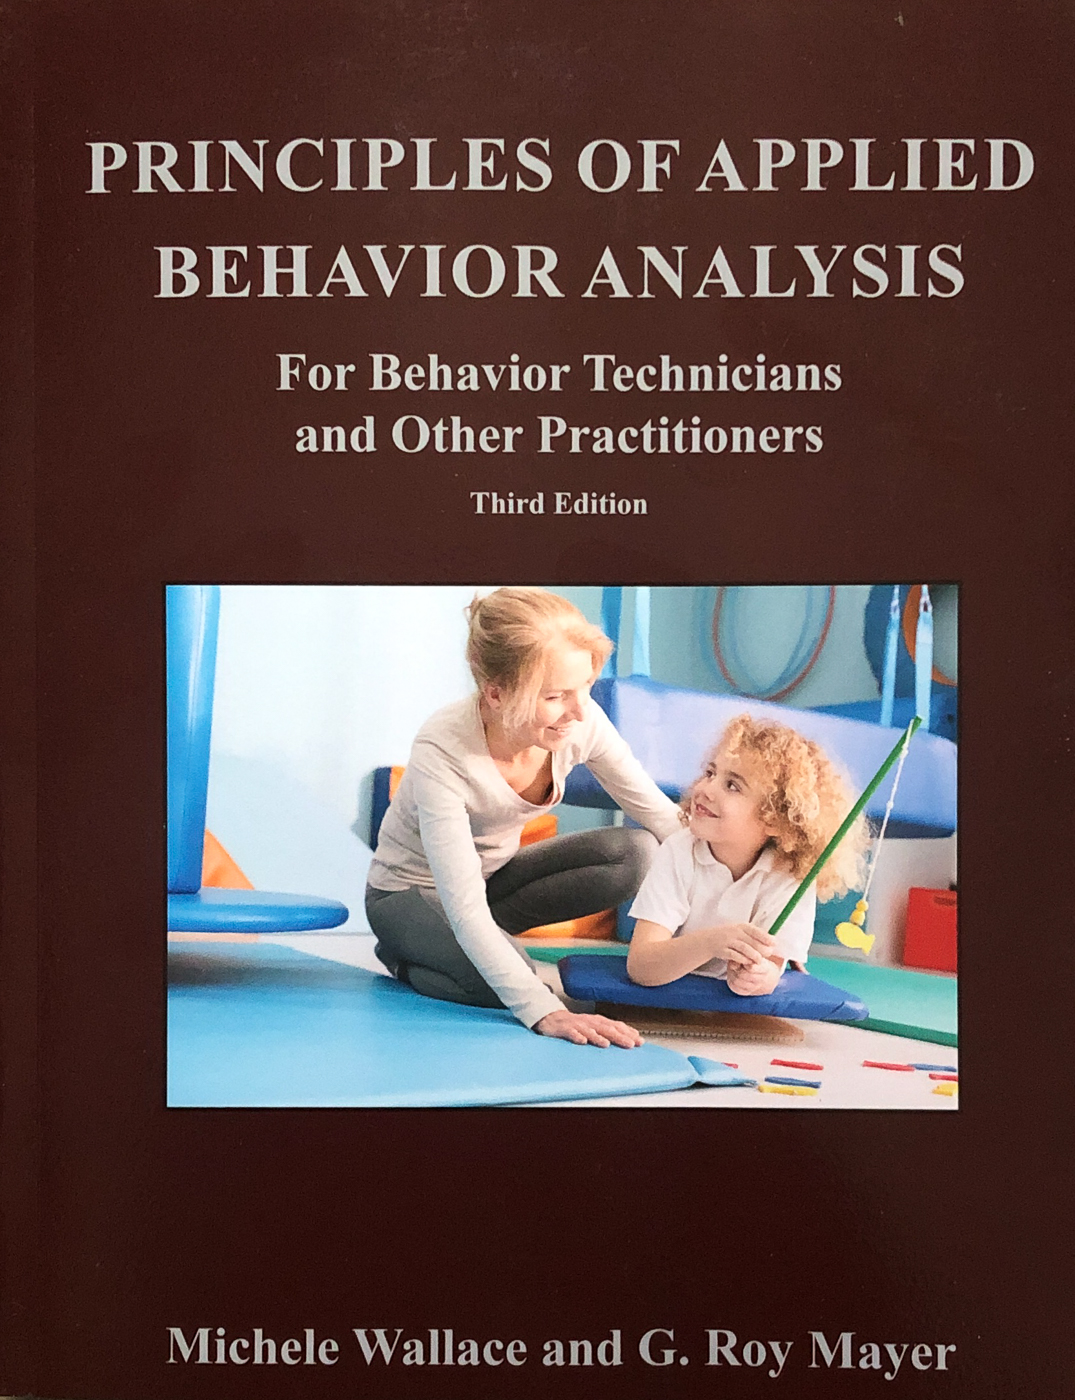 applied behavior analysis research paper